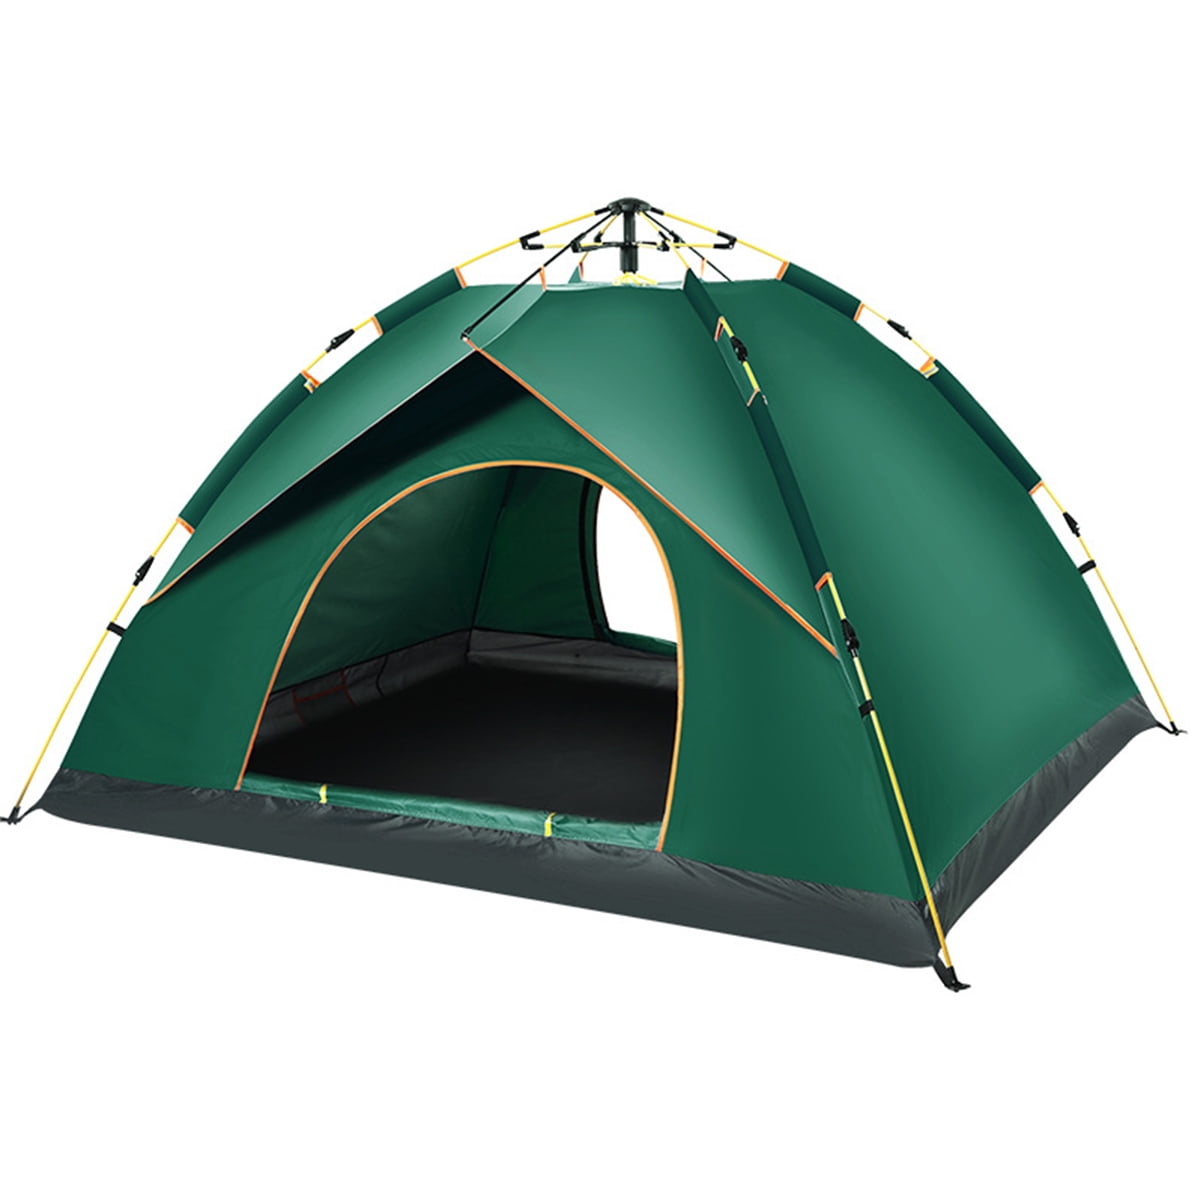 Automatic Pop Up Camping Tent for 3-4 Person, Portable Waterproof